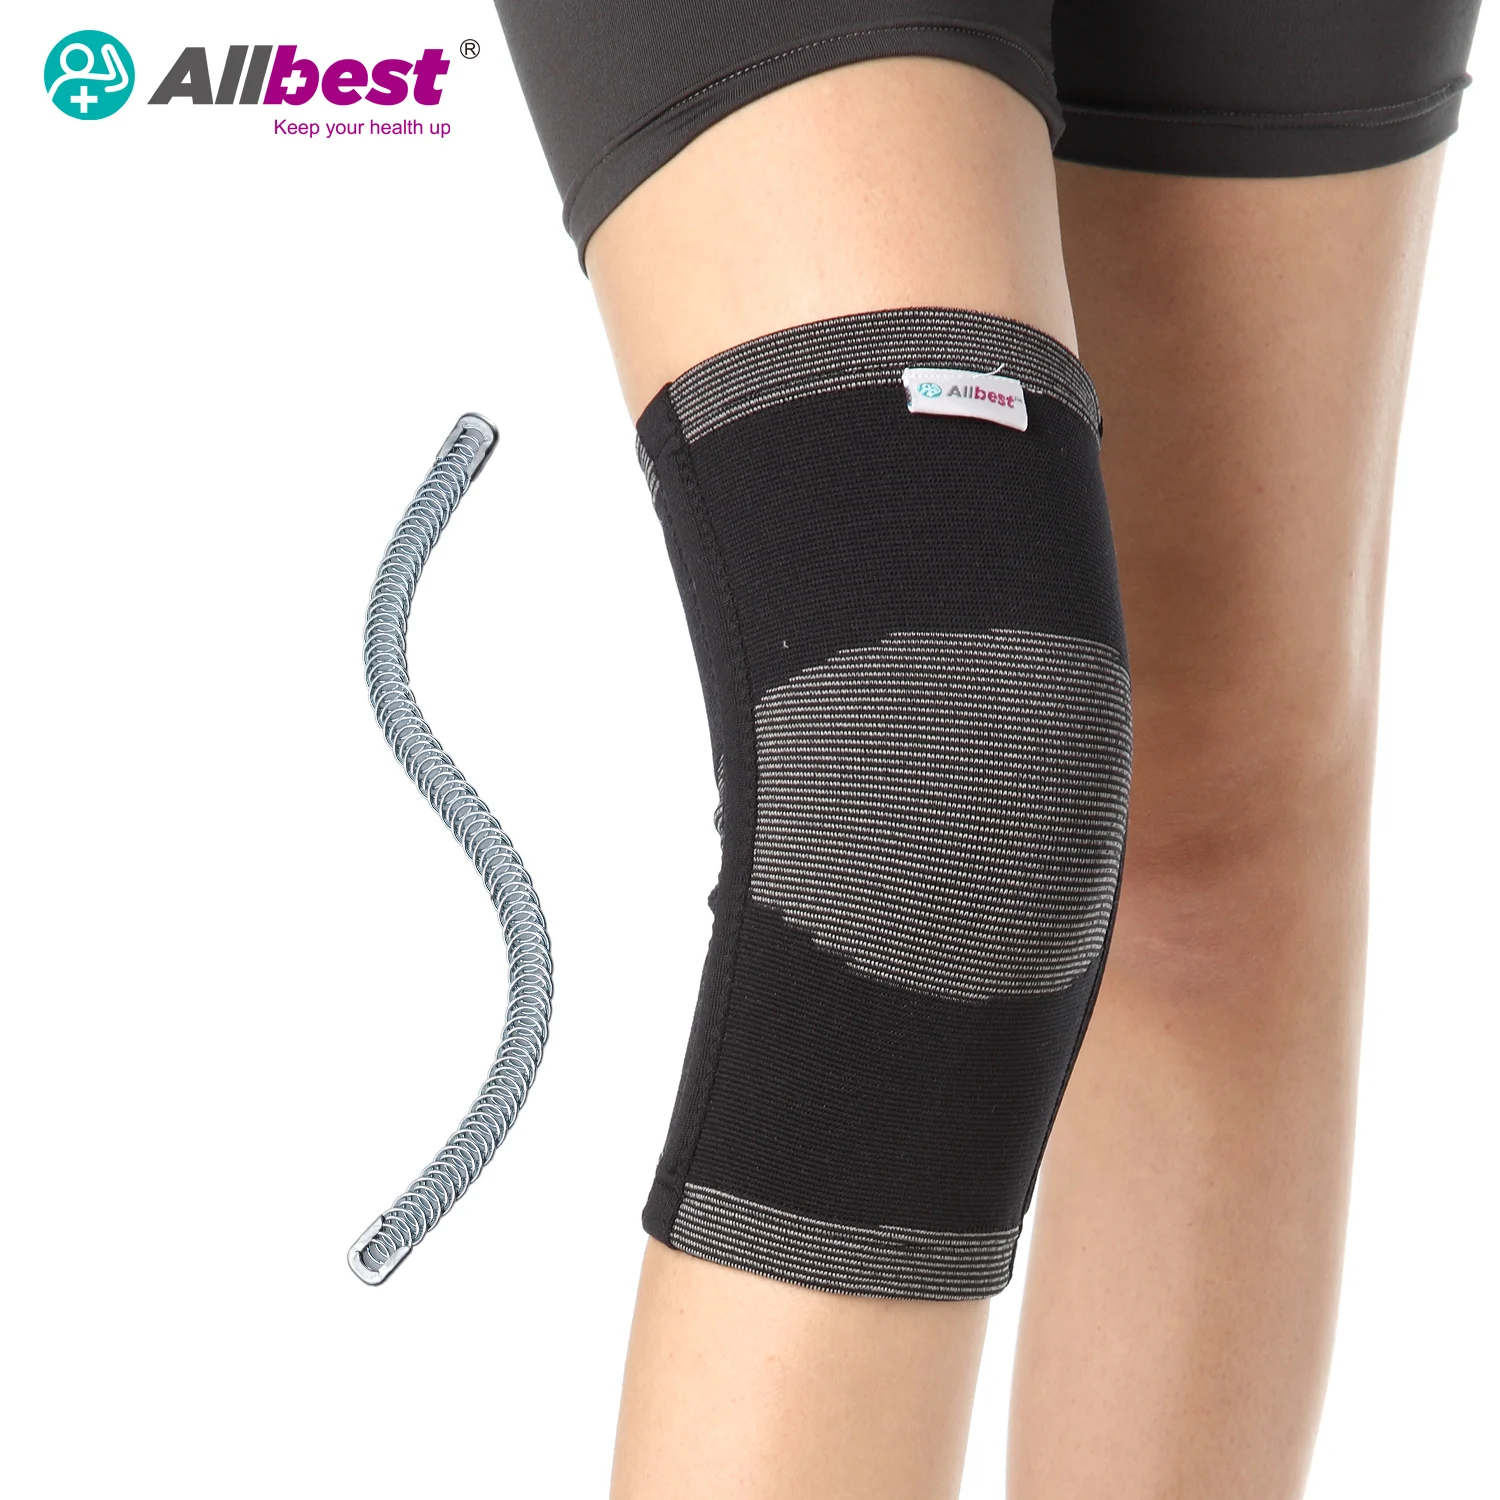 Spring Stabilize Compression Bamboo Charcoal Knee Support Buy Taiwan Bamboo Charcoal Elastic Knee Support Nano Knee Support Bamboo Knee Brace Product On Alibaba Com